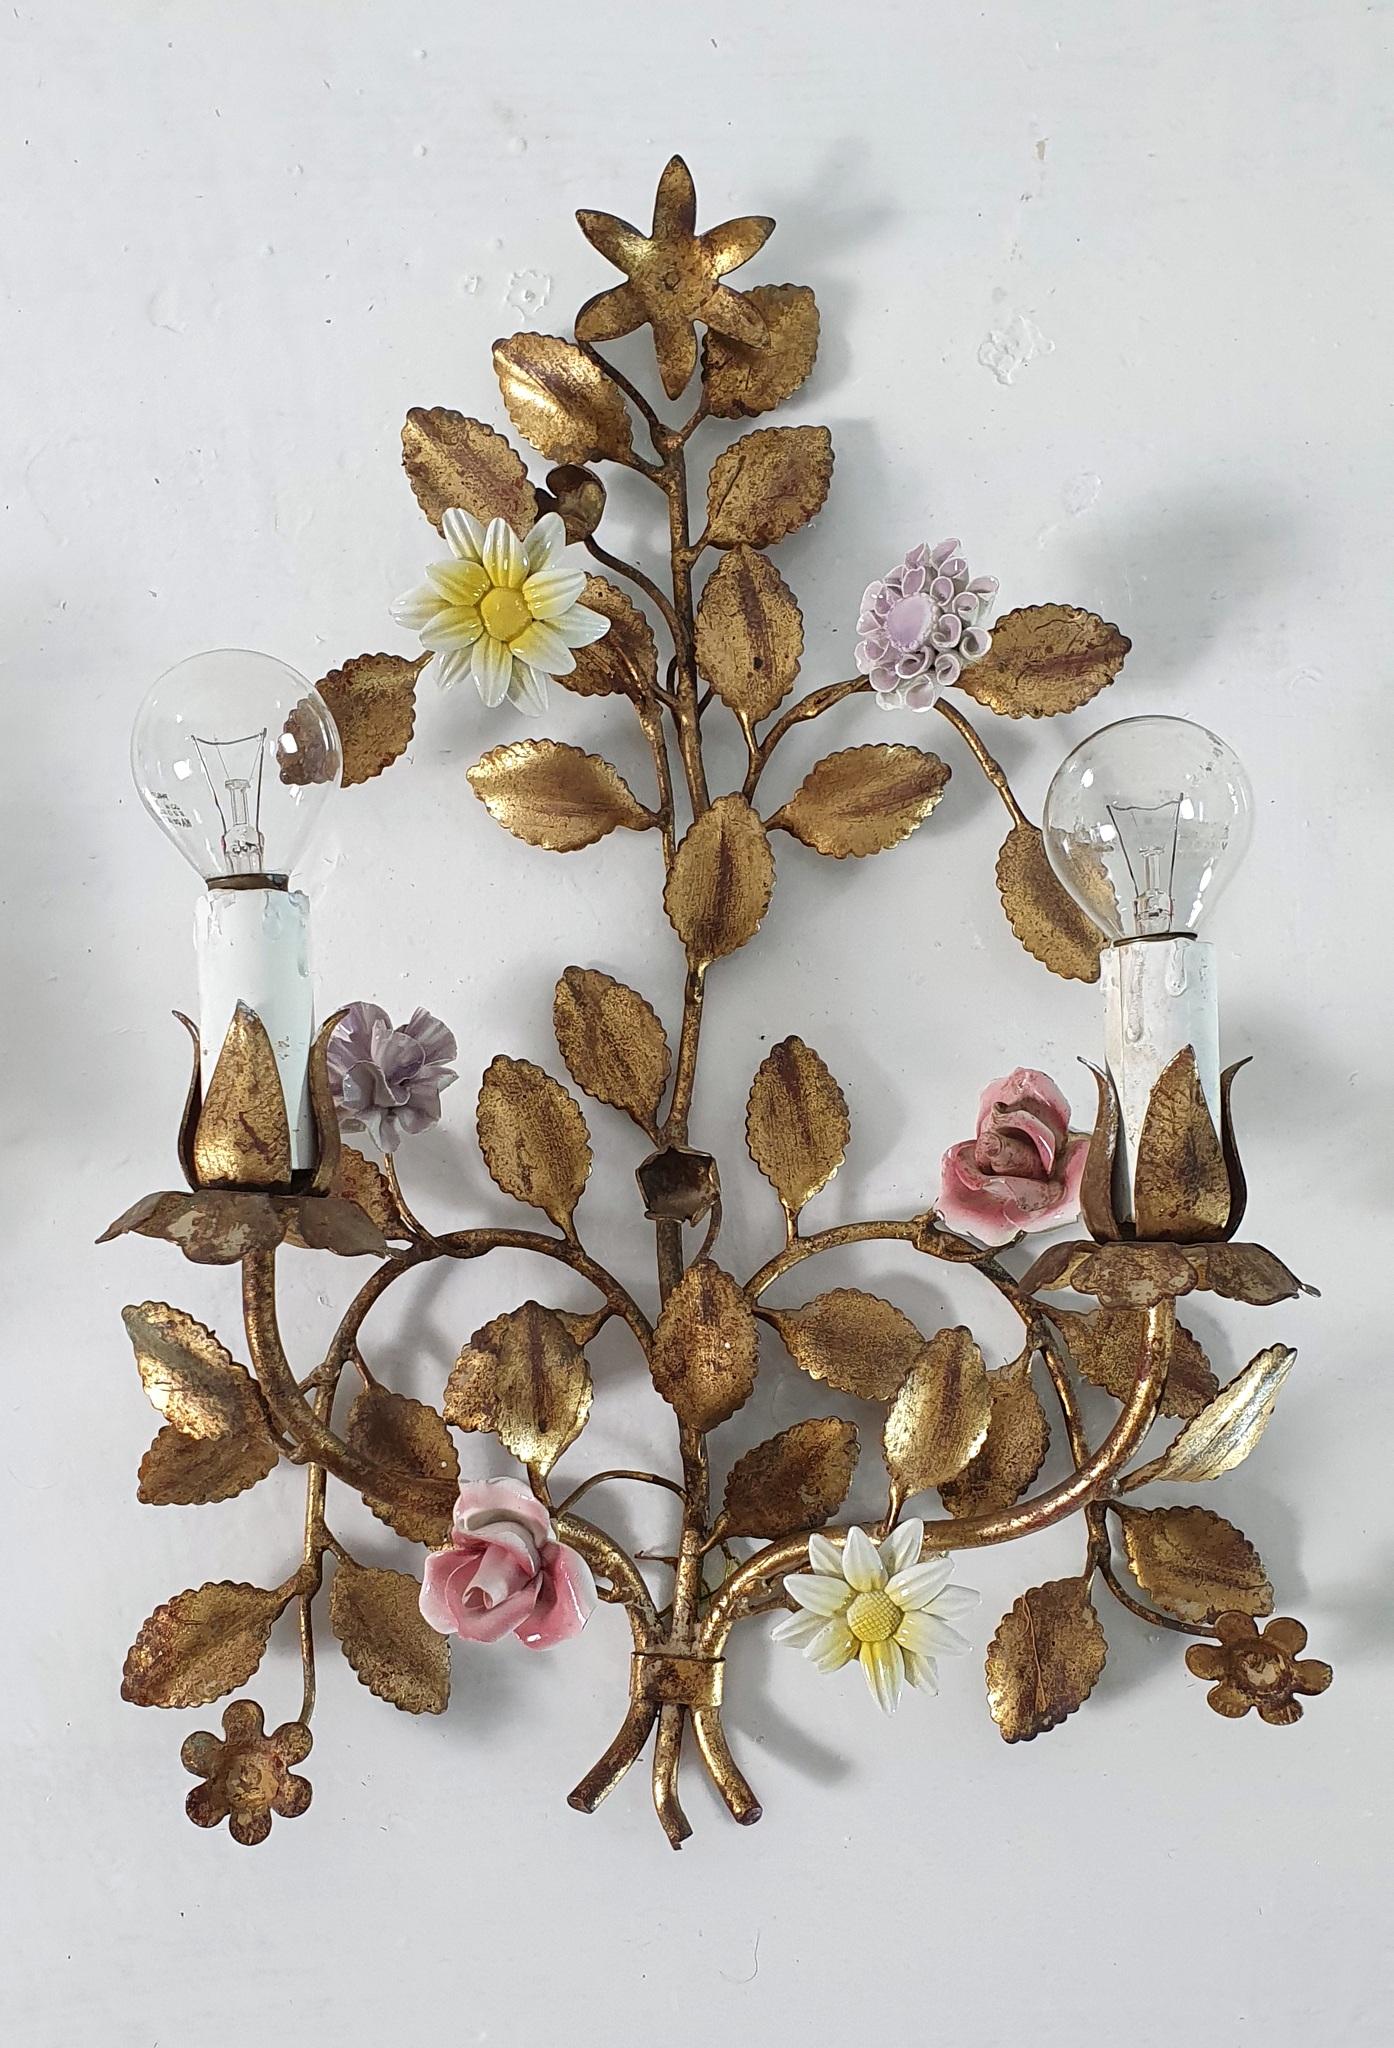 These sconces are made from iron and painted in gold color with added patina and has two candle lights each with porcelain flowers in different shapes and colors. They are both in working condition. The lightbulbs used are e14 which are found both